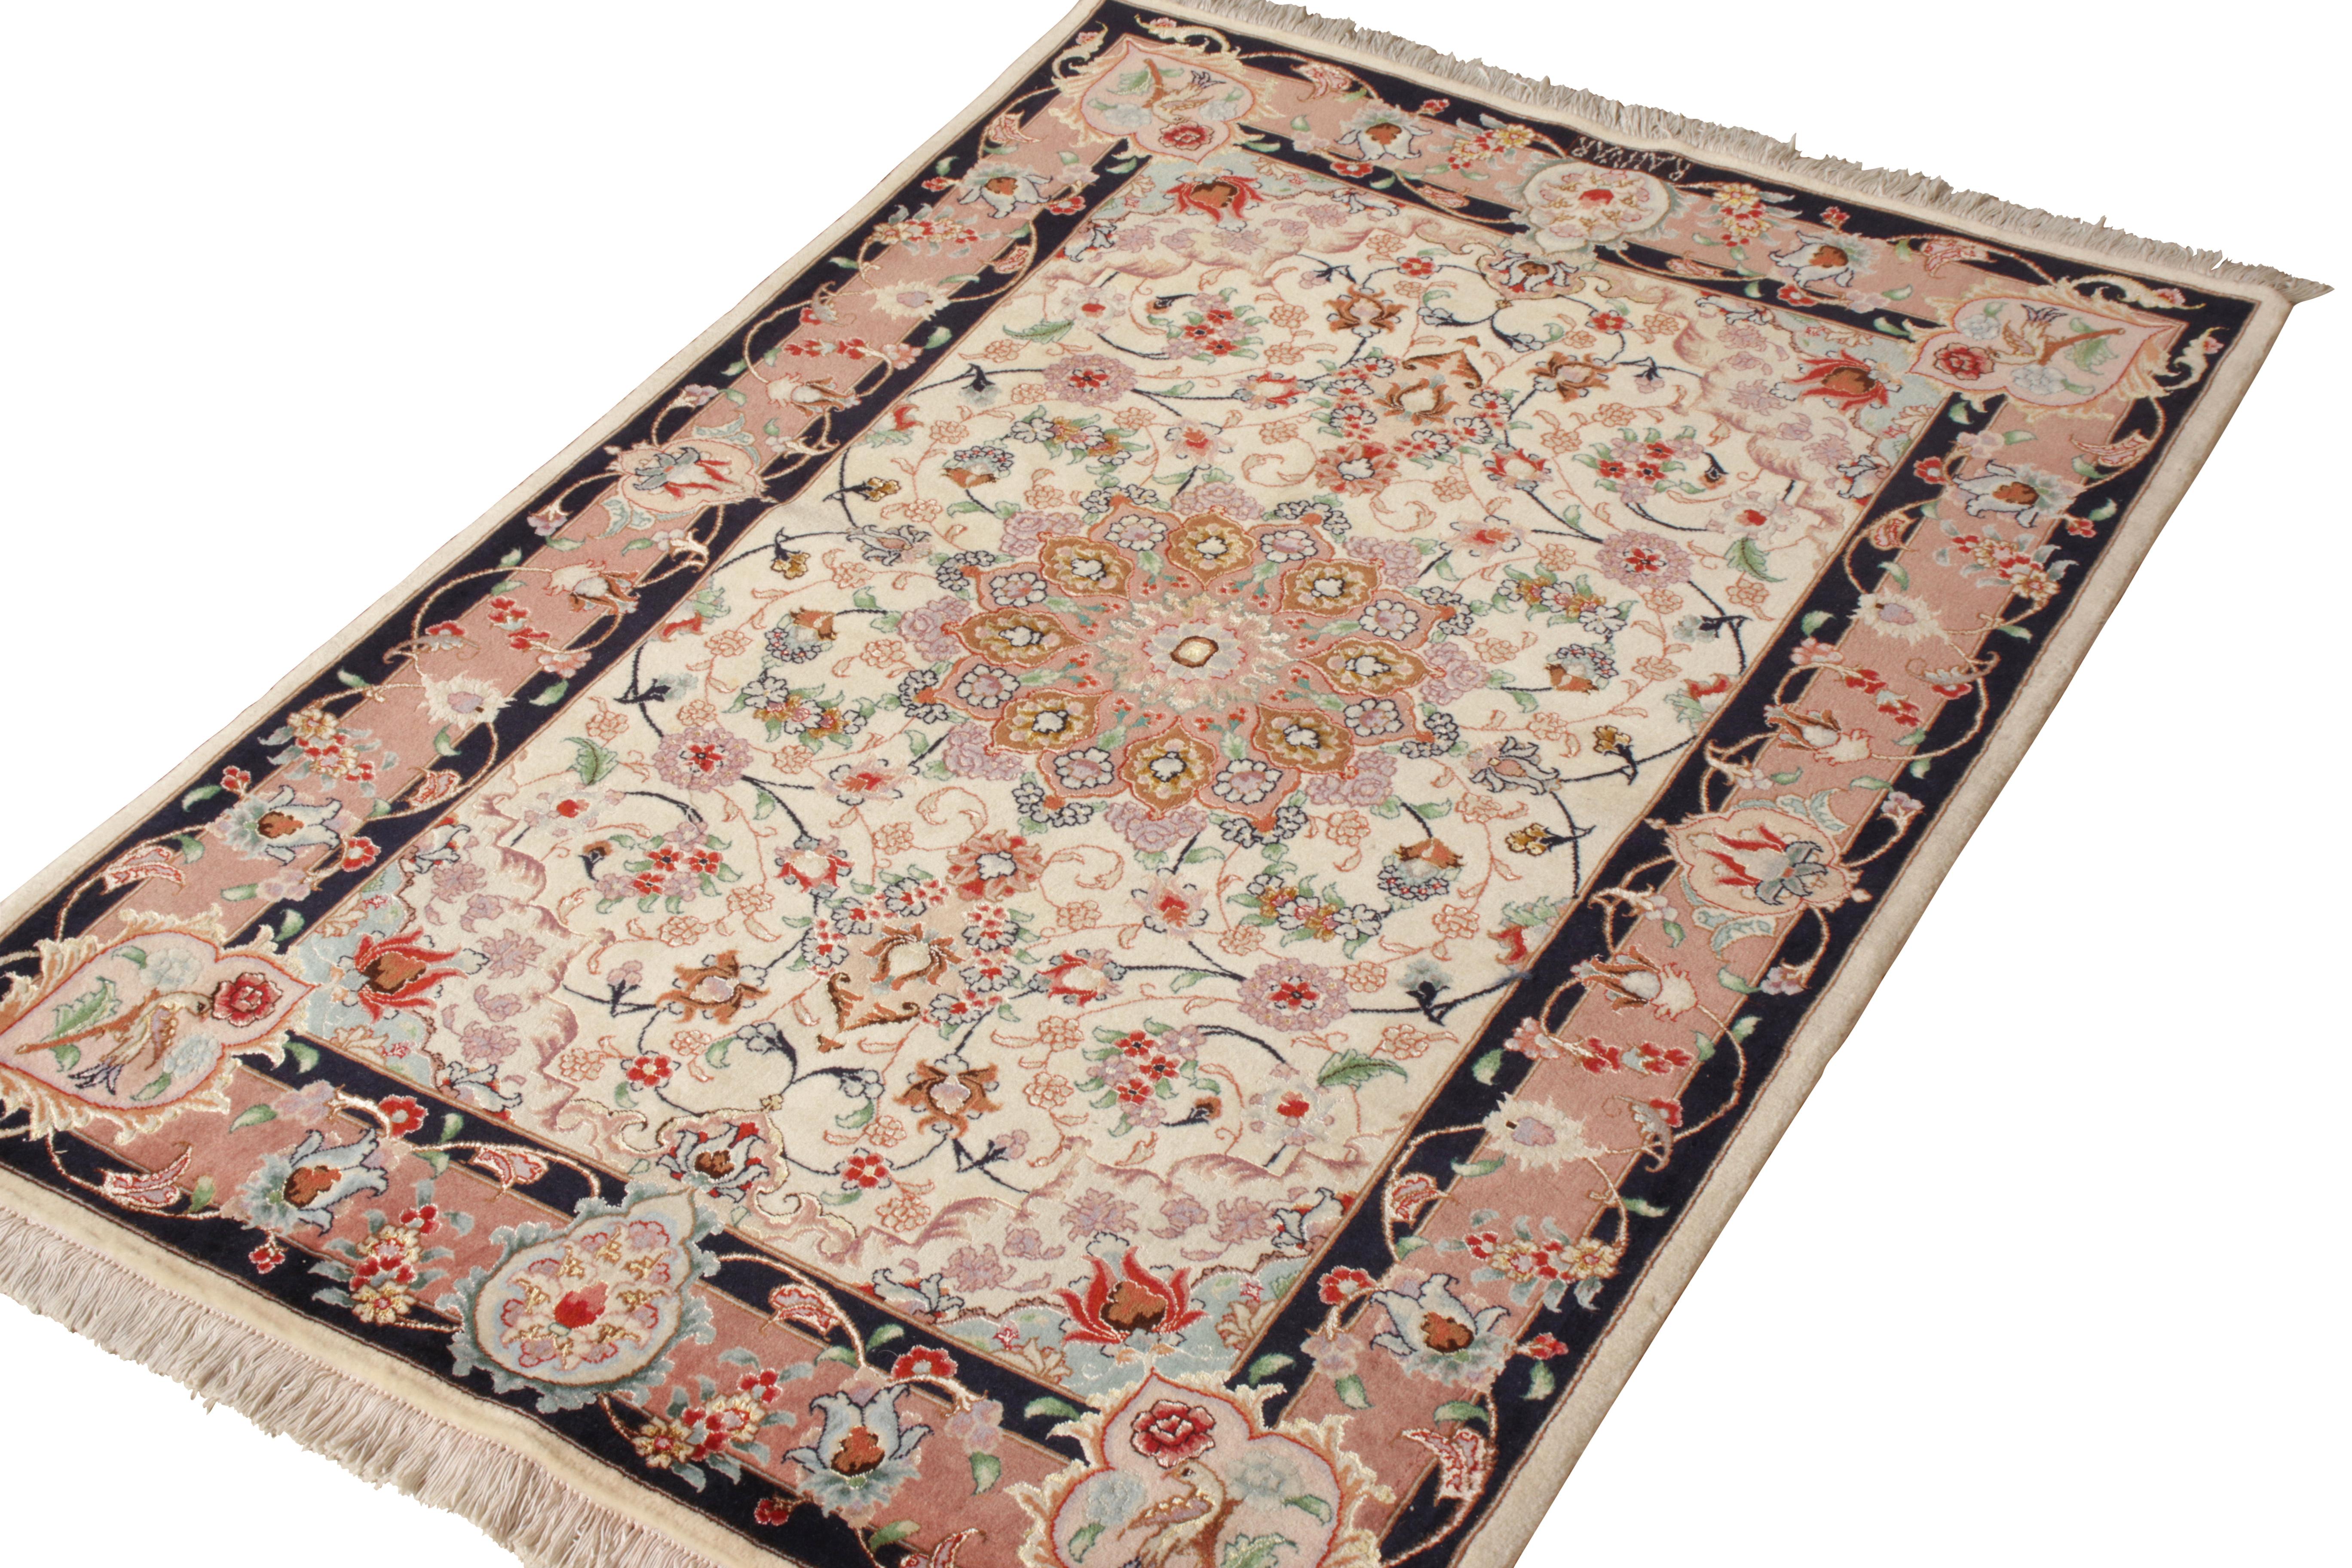 Hand-Knotted Vintage Tabriz Persian Rug in Beige Medallion Floral by Rug & Kilim In Good Condition For Sale In Long Island City, NY